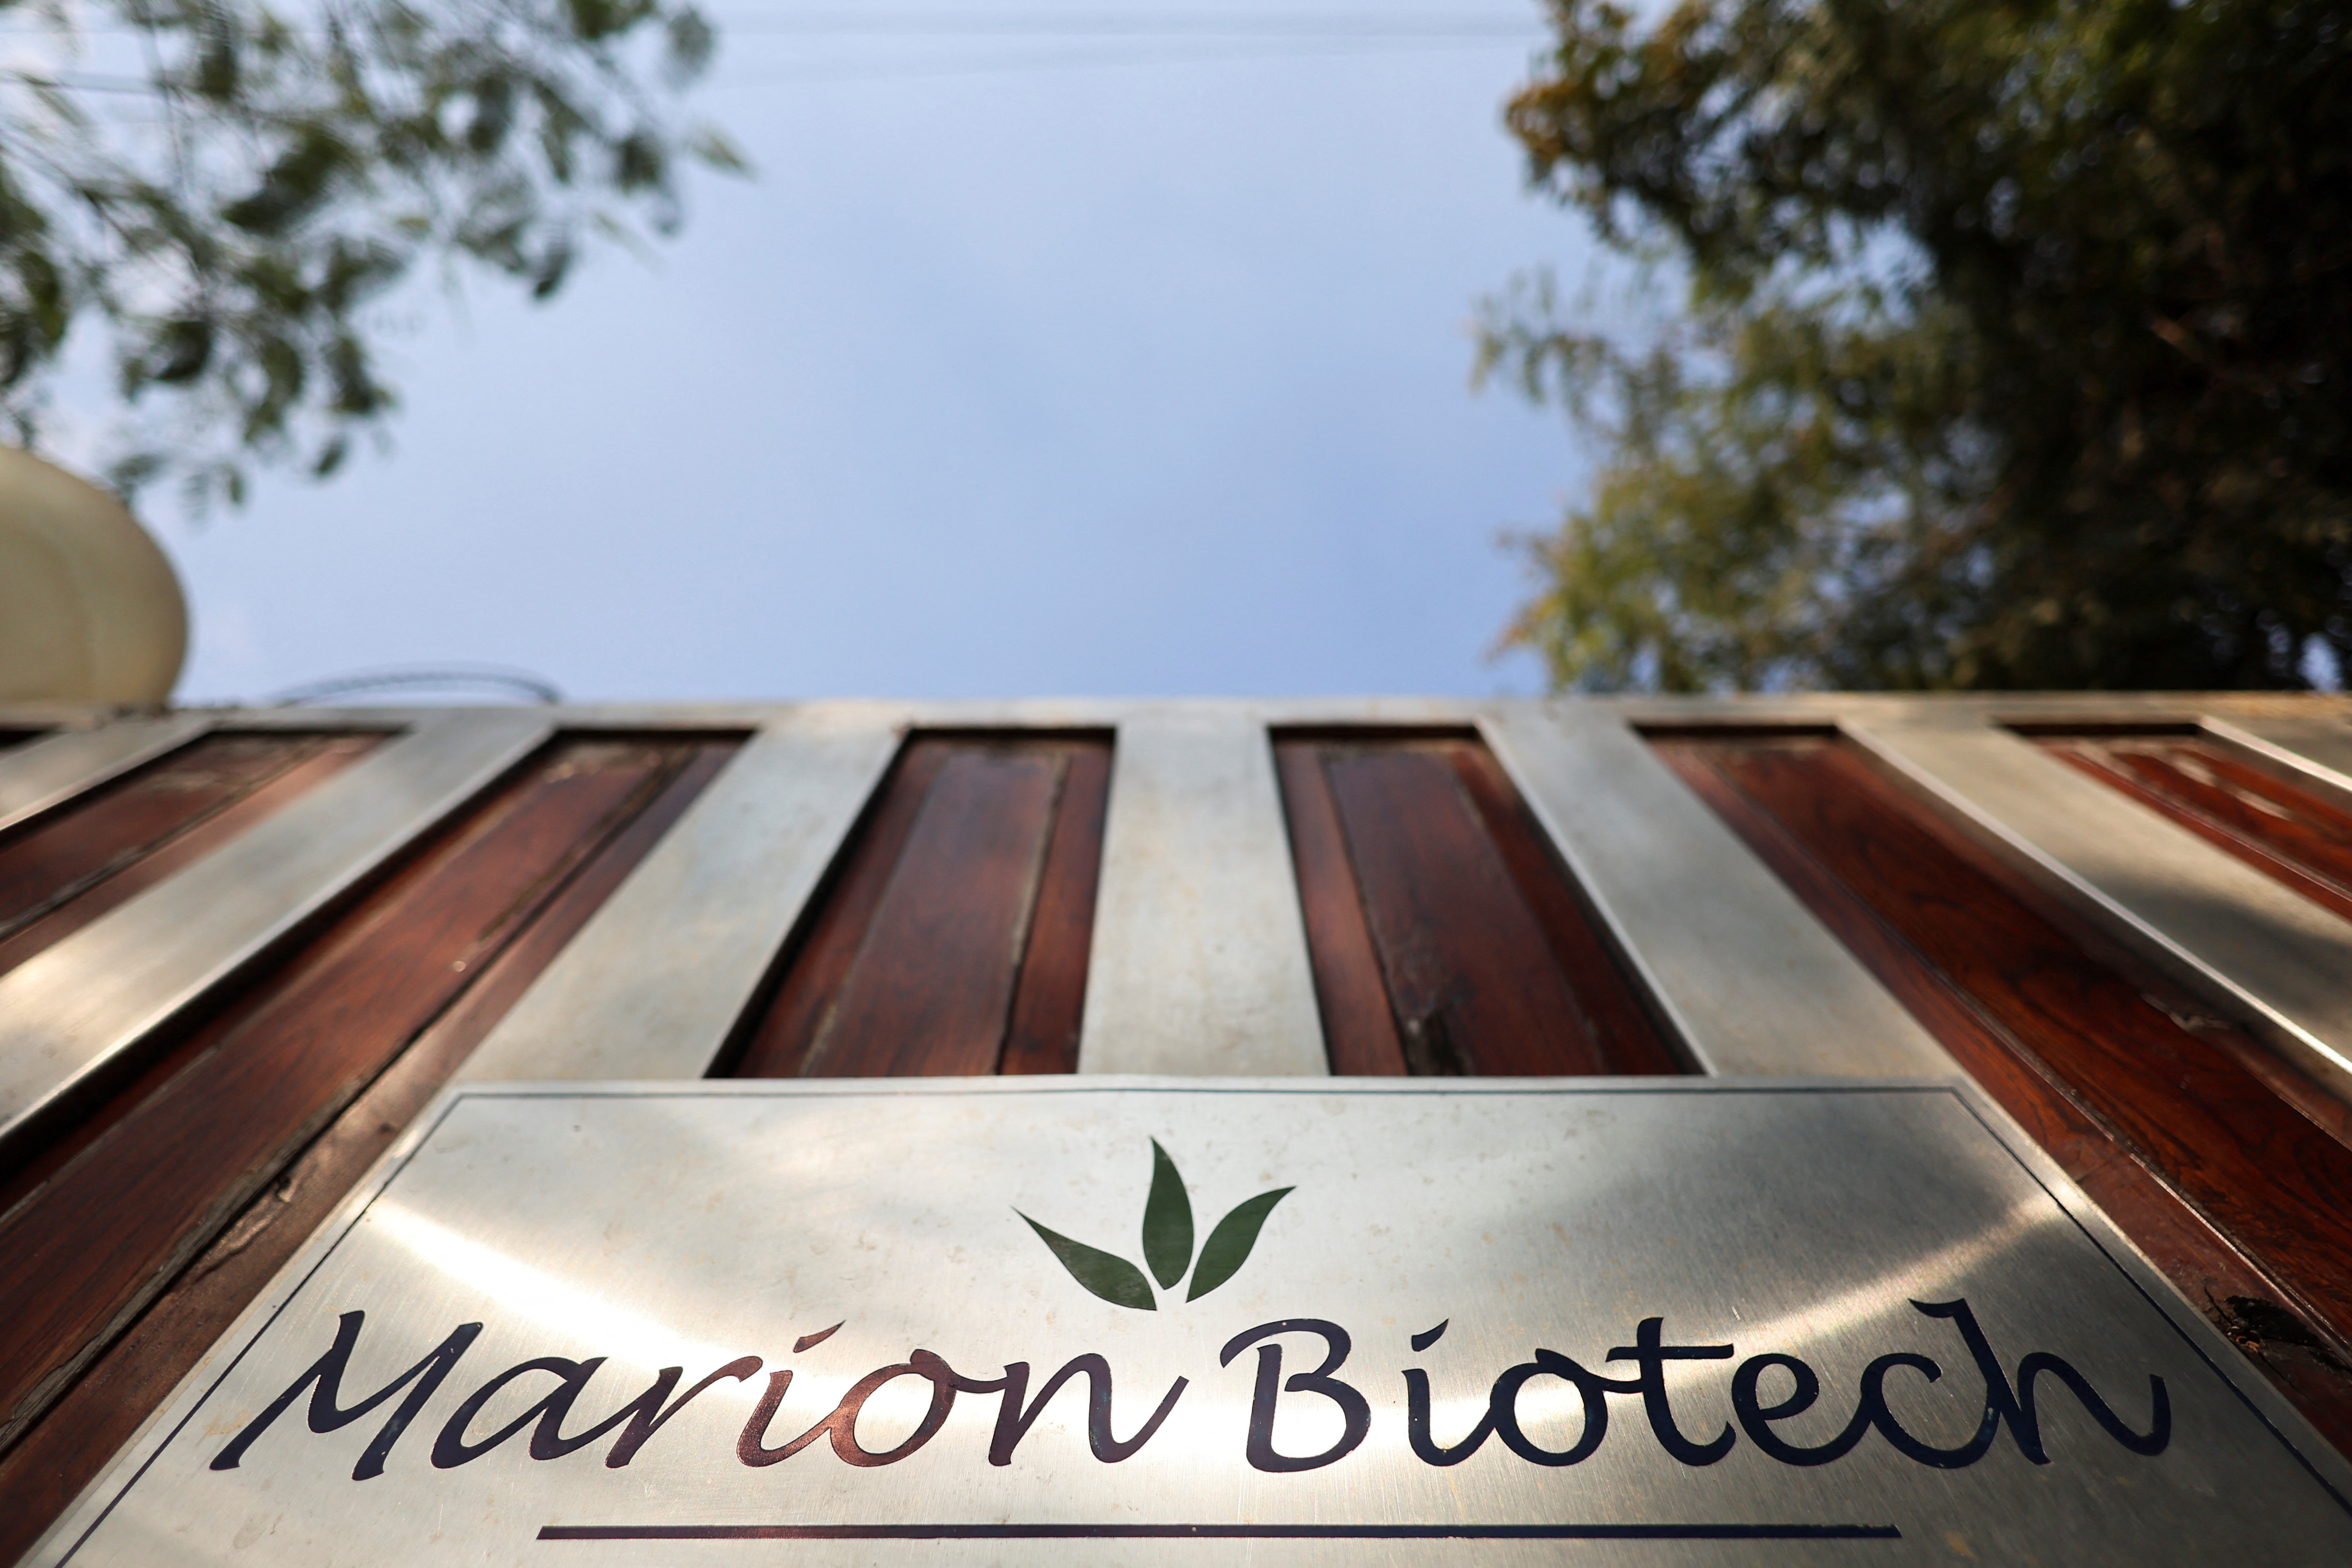 The logo of healthcare and pharmaceutical company Marion Biotech is seen on a gate outside their office in Noida.